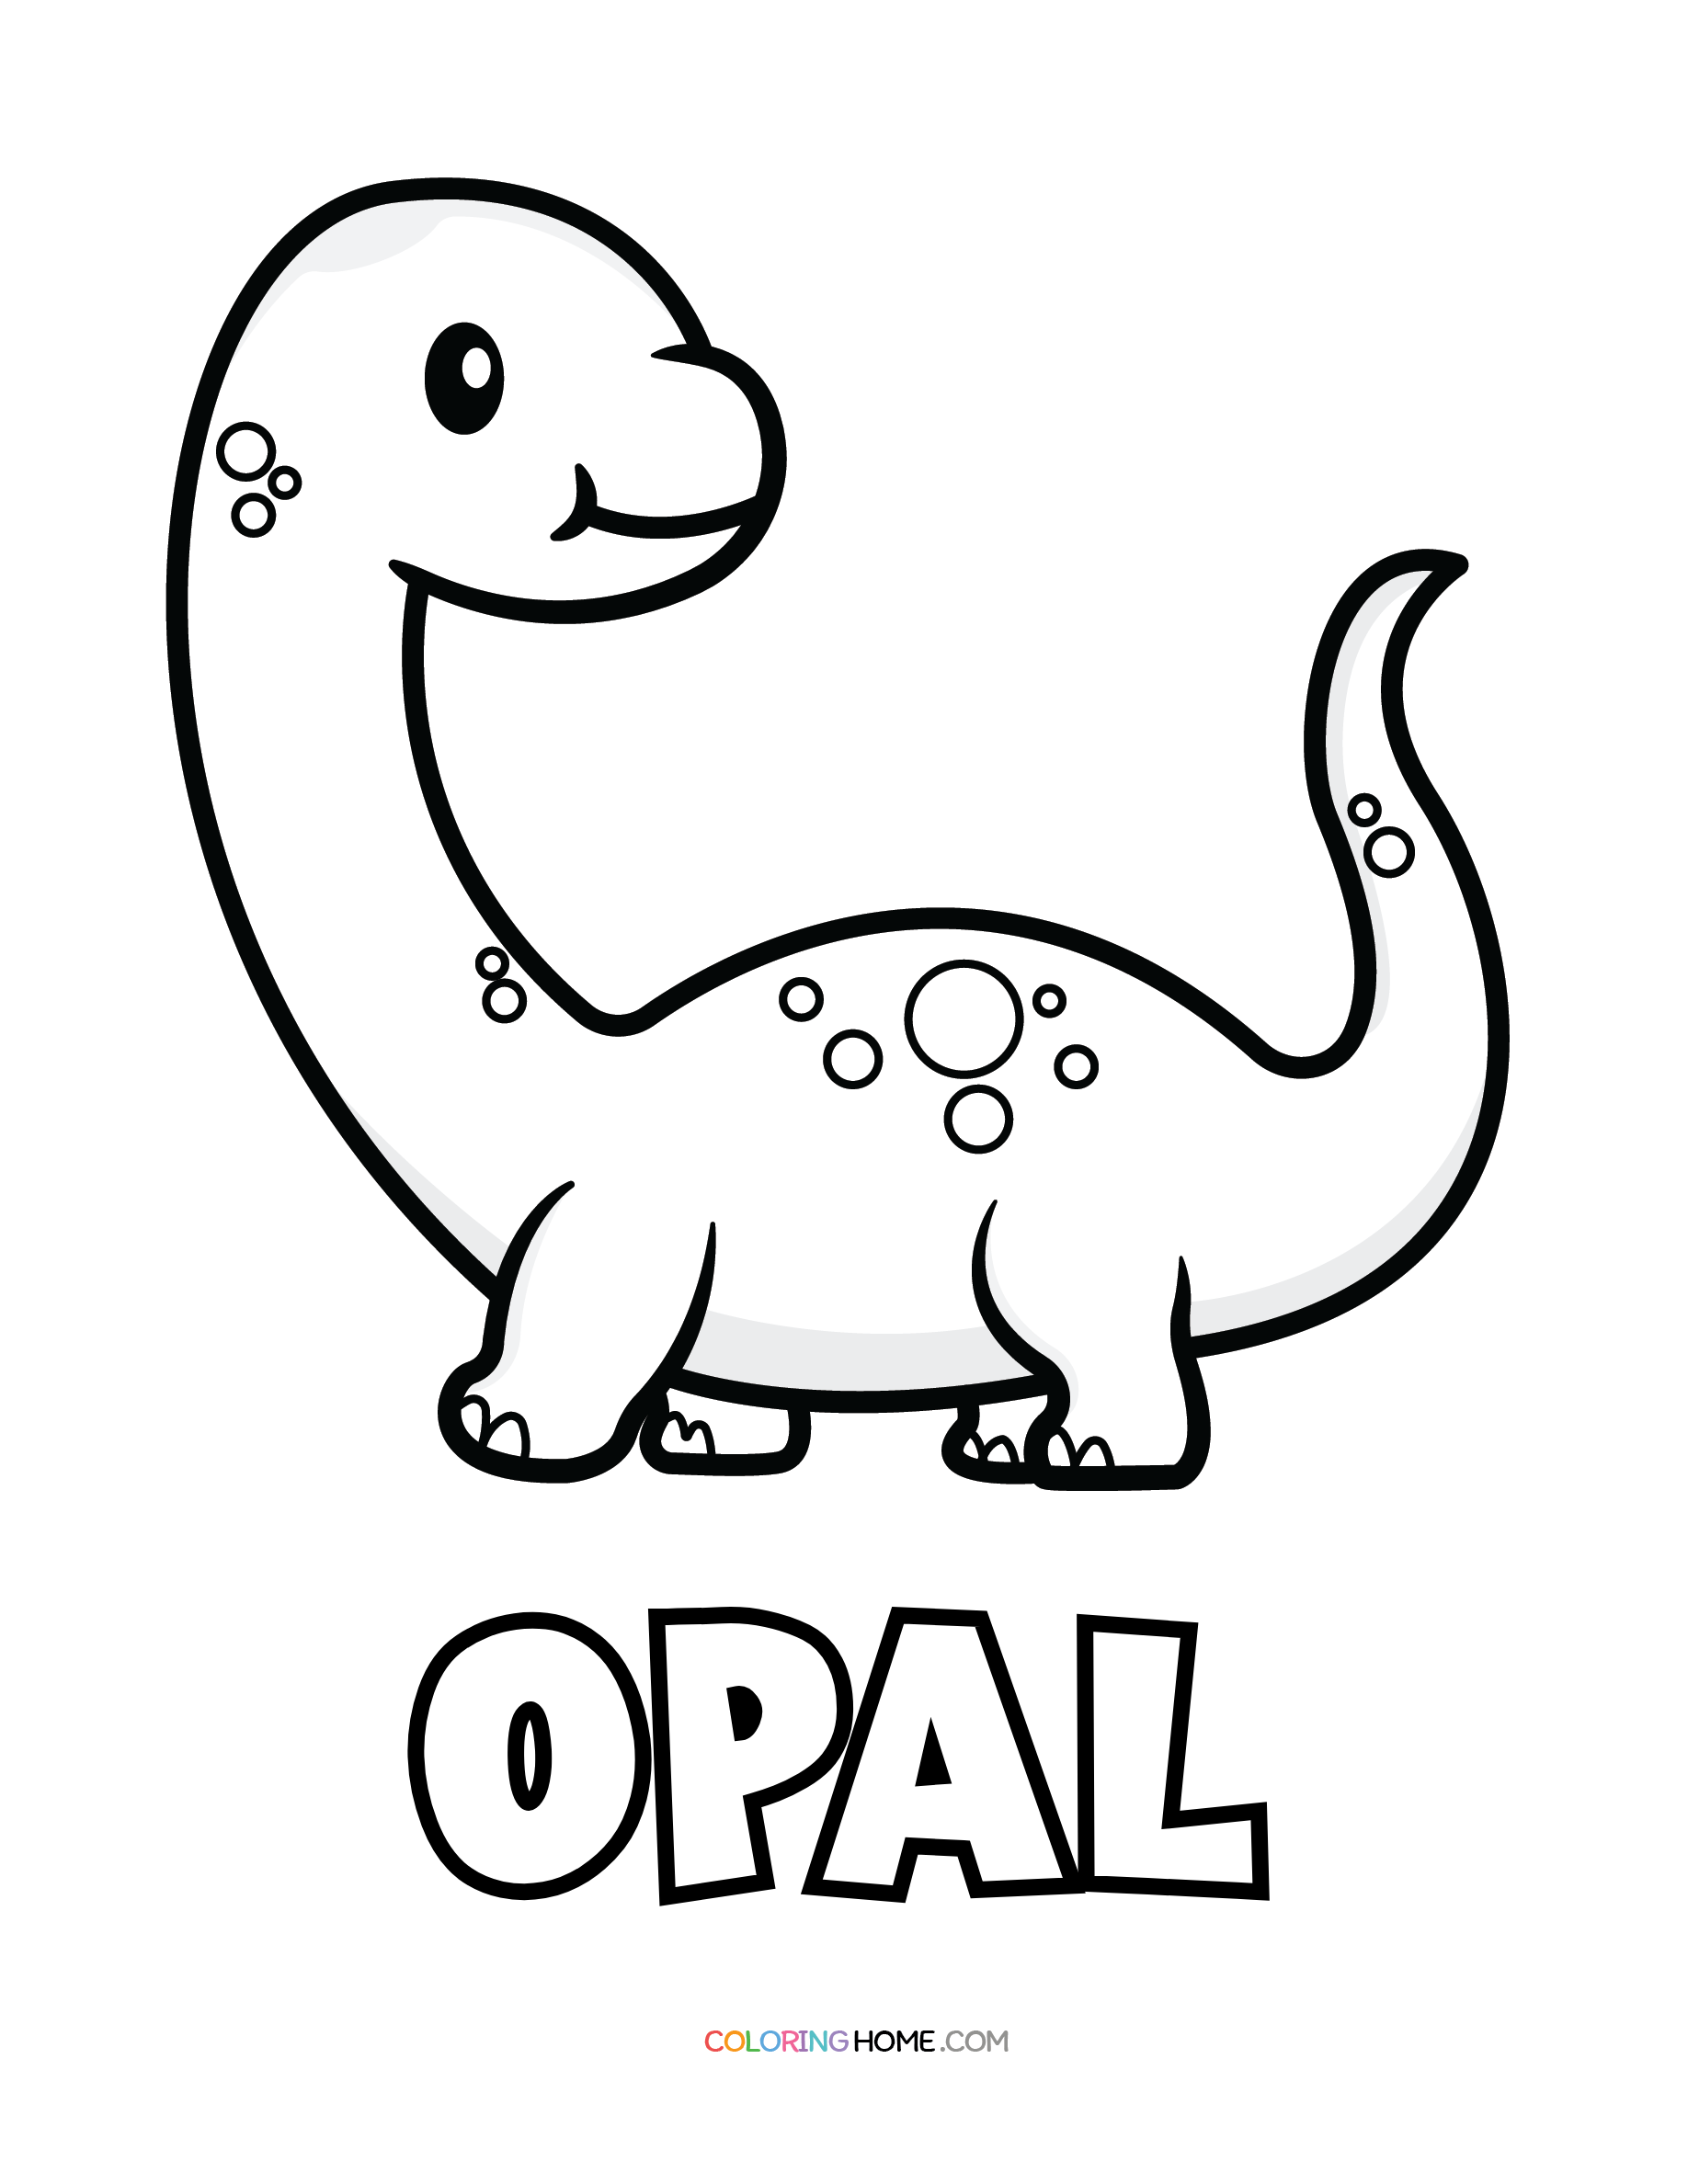 Opal dinosaur coloring page